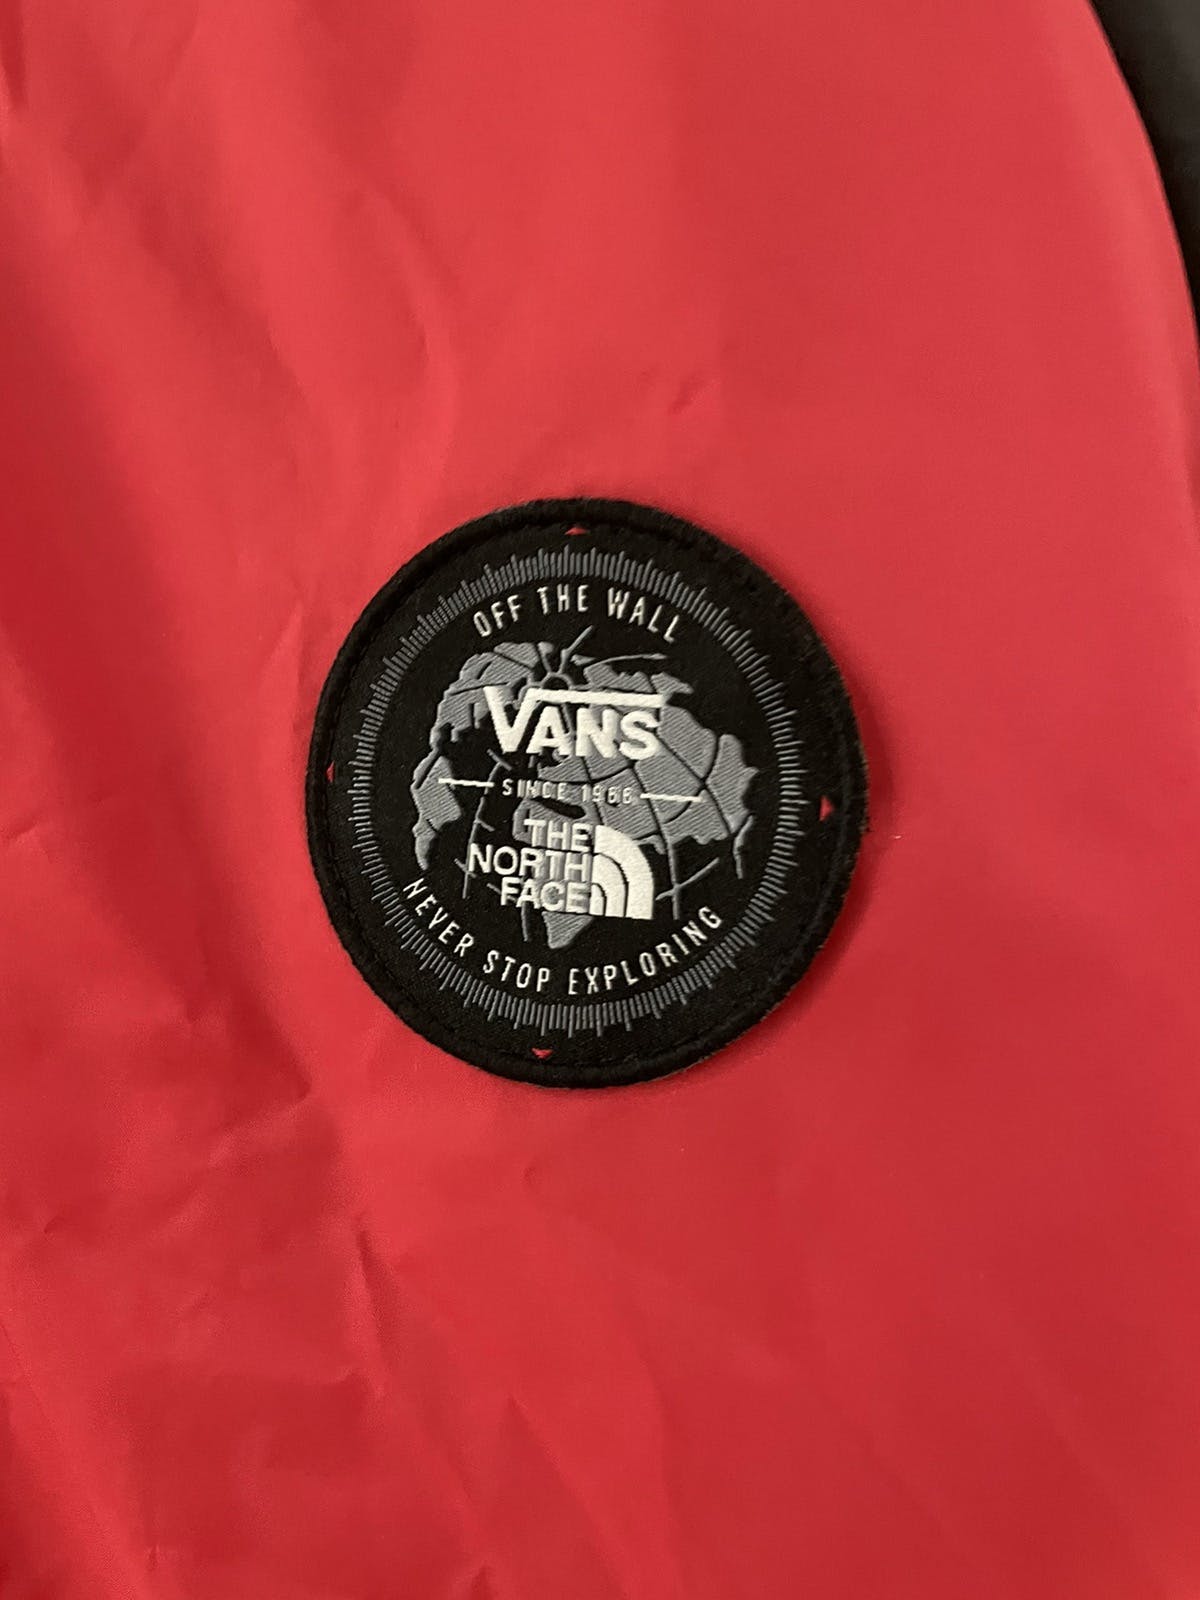 The North Face X vans jacket - 3